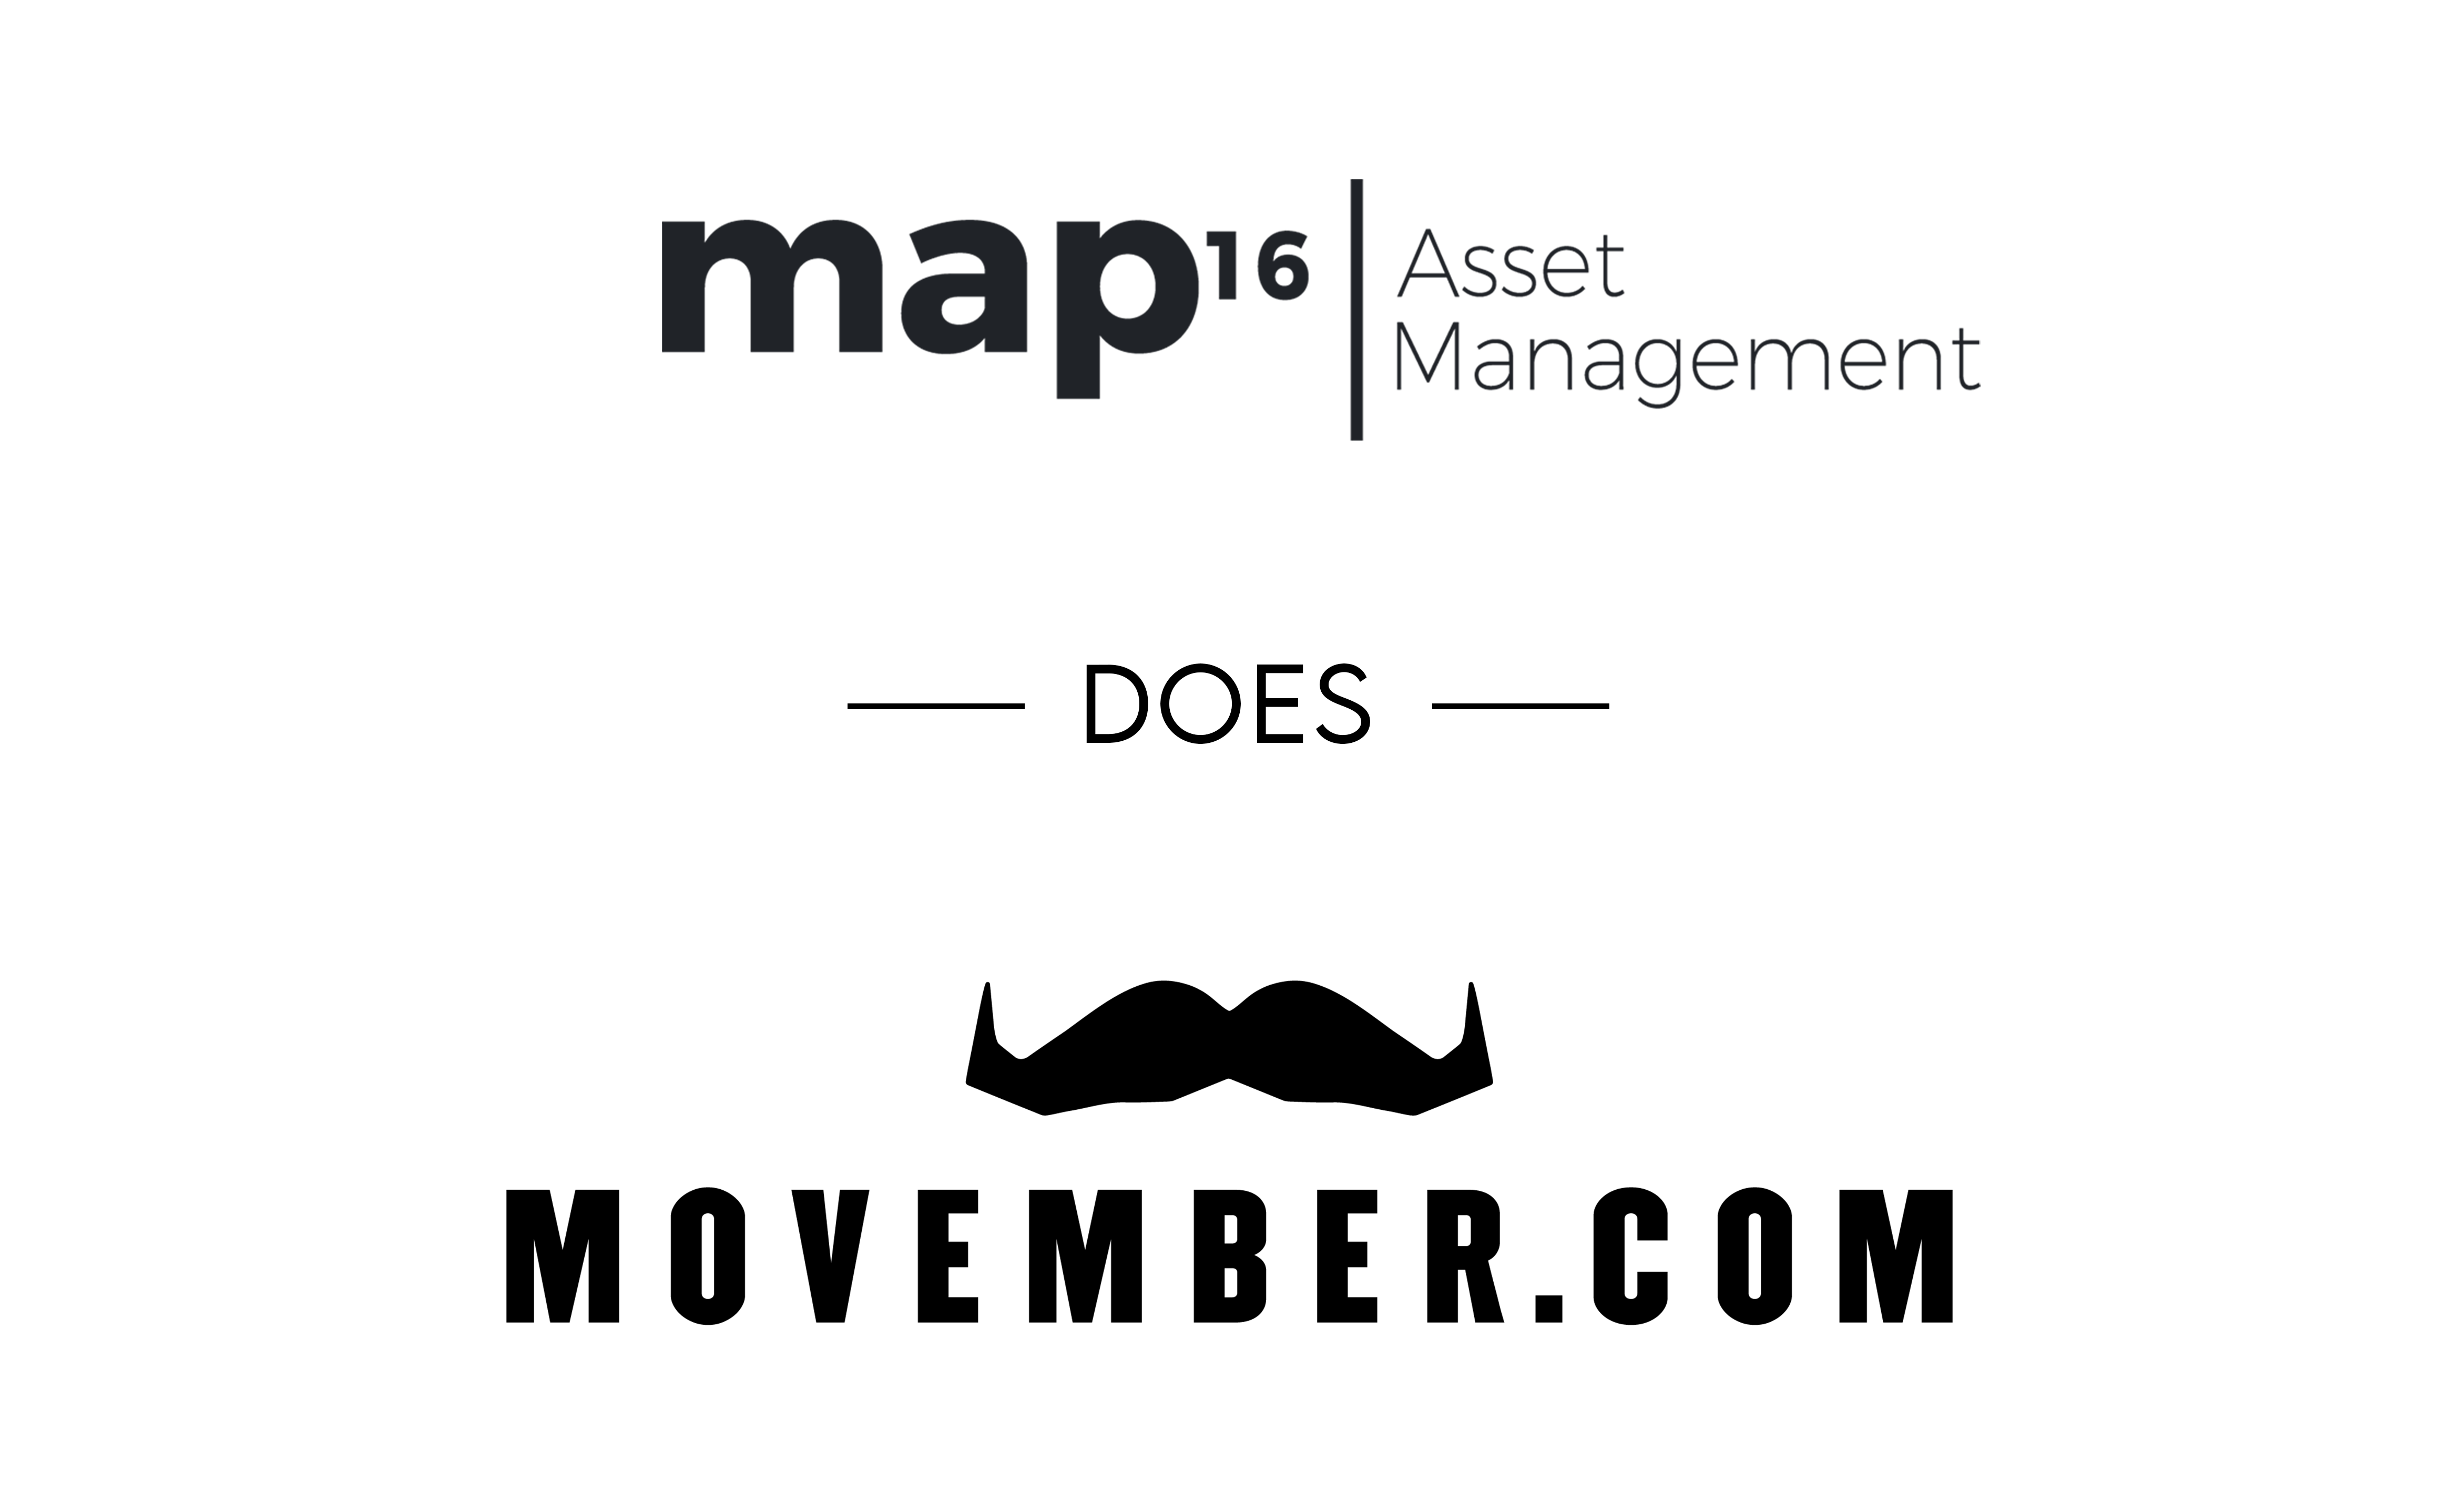 map16 Does Movember